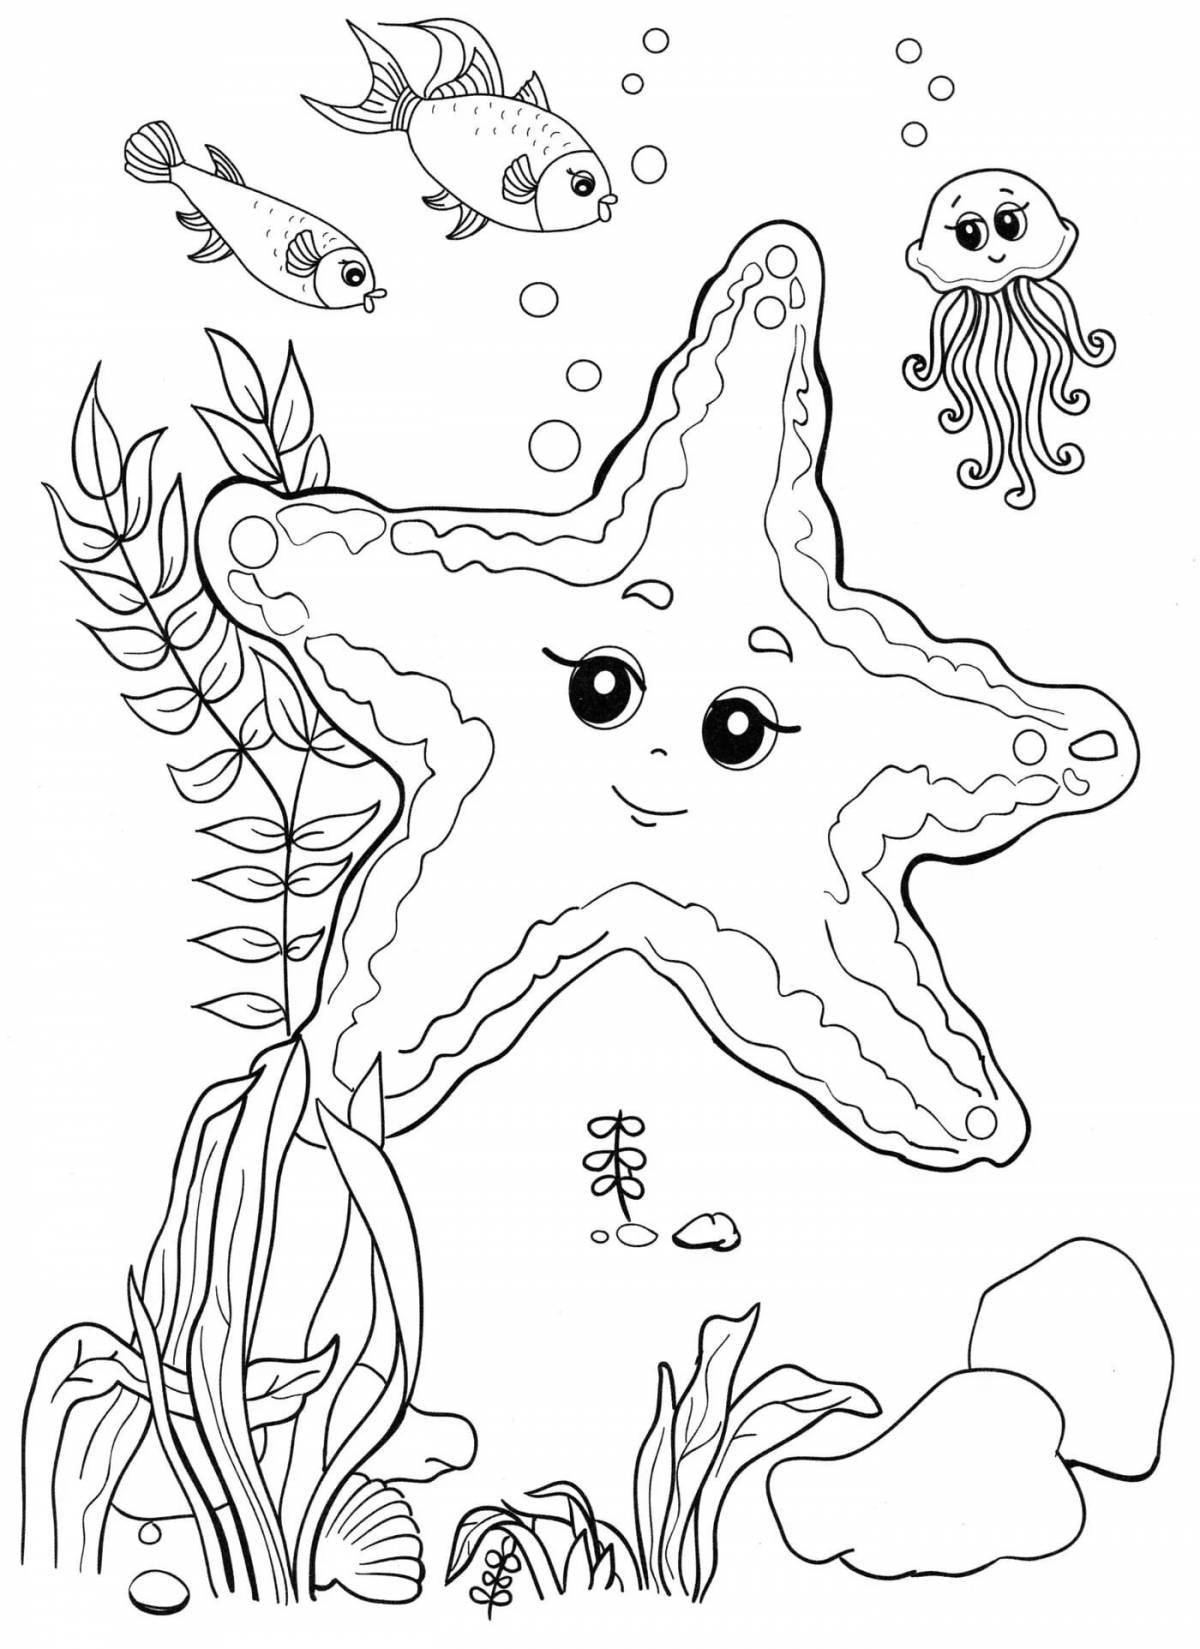 Gorgeous marine life coloring book for 5-6 year olds